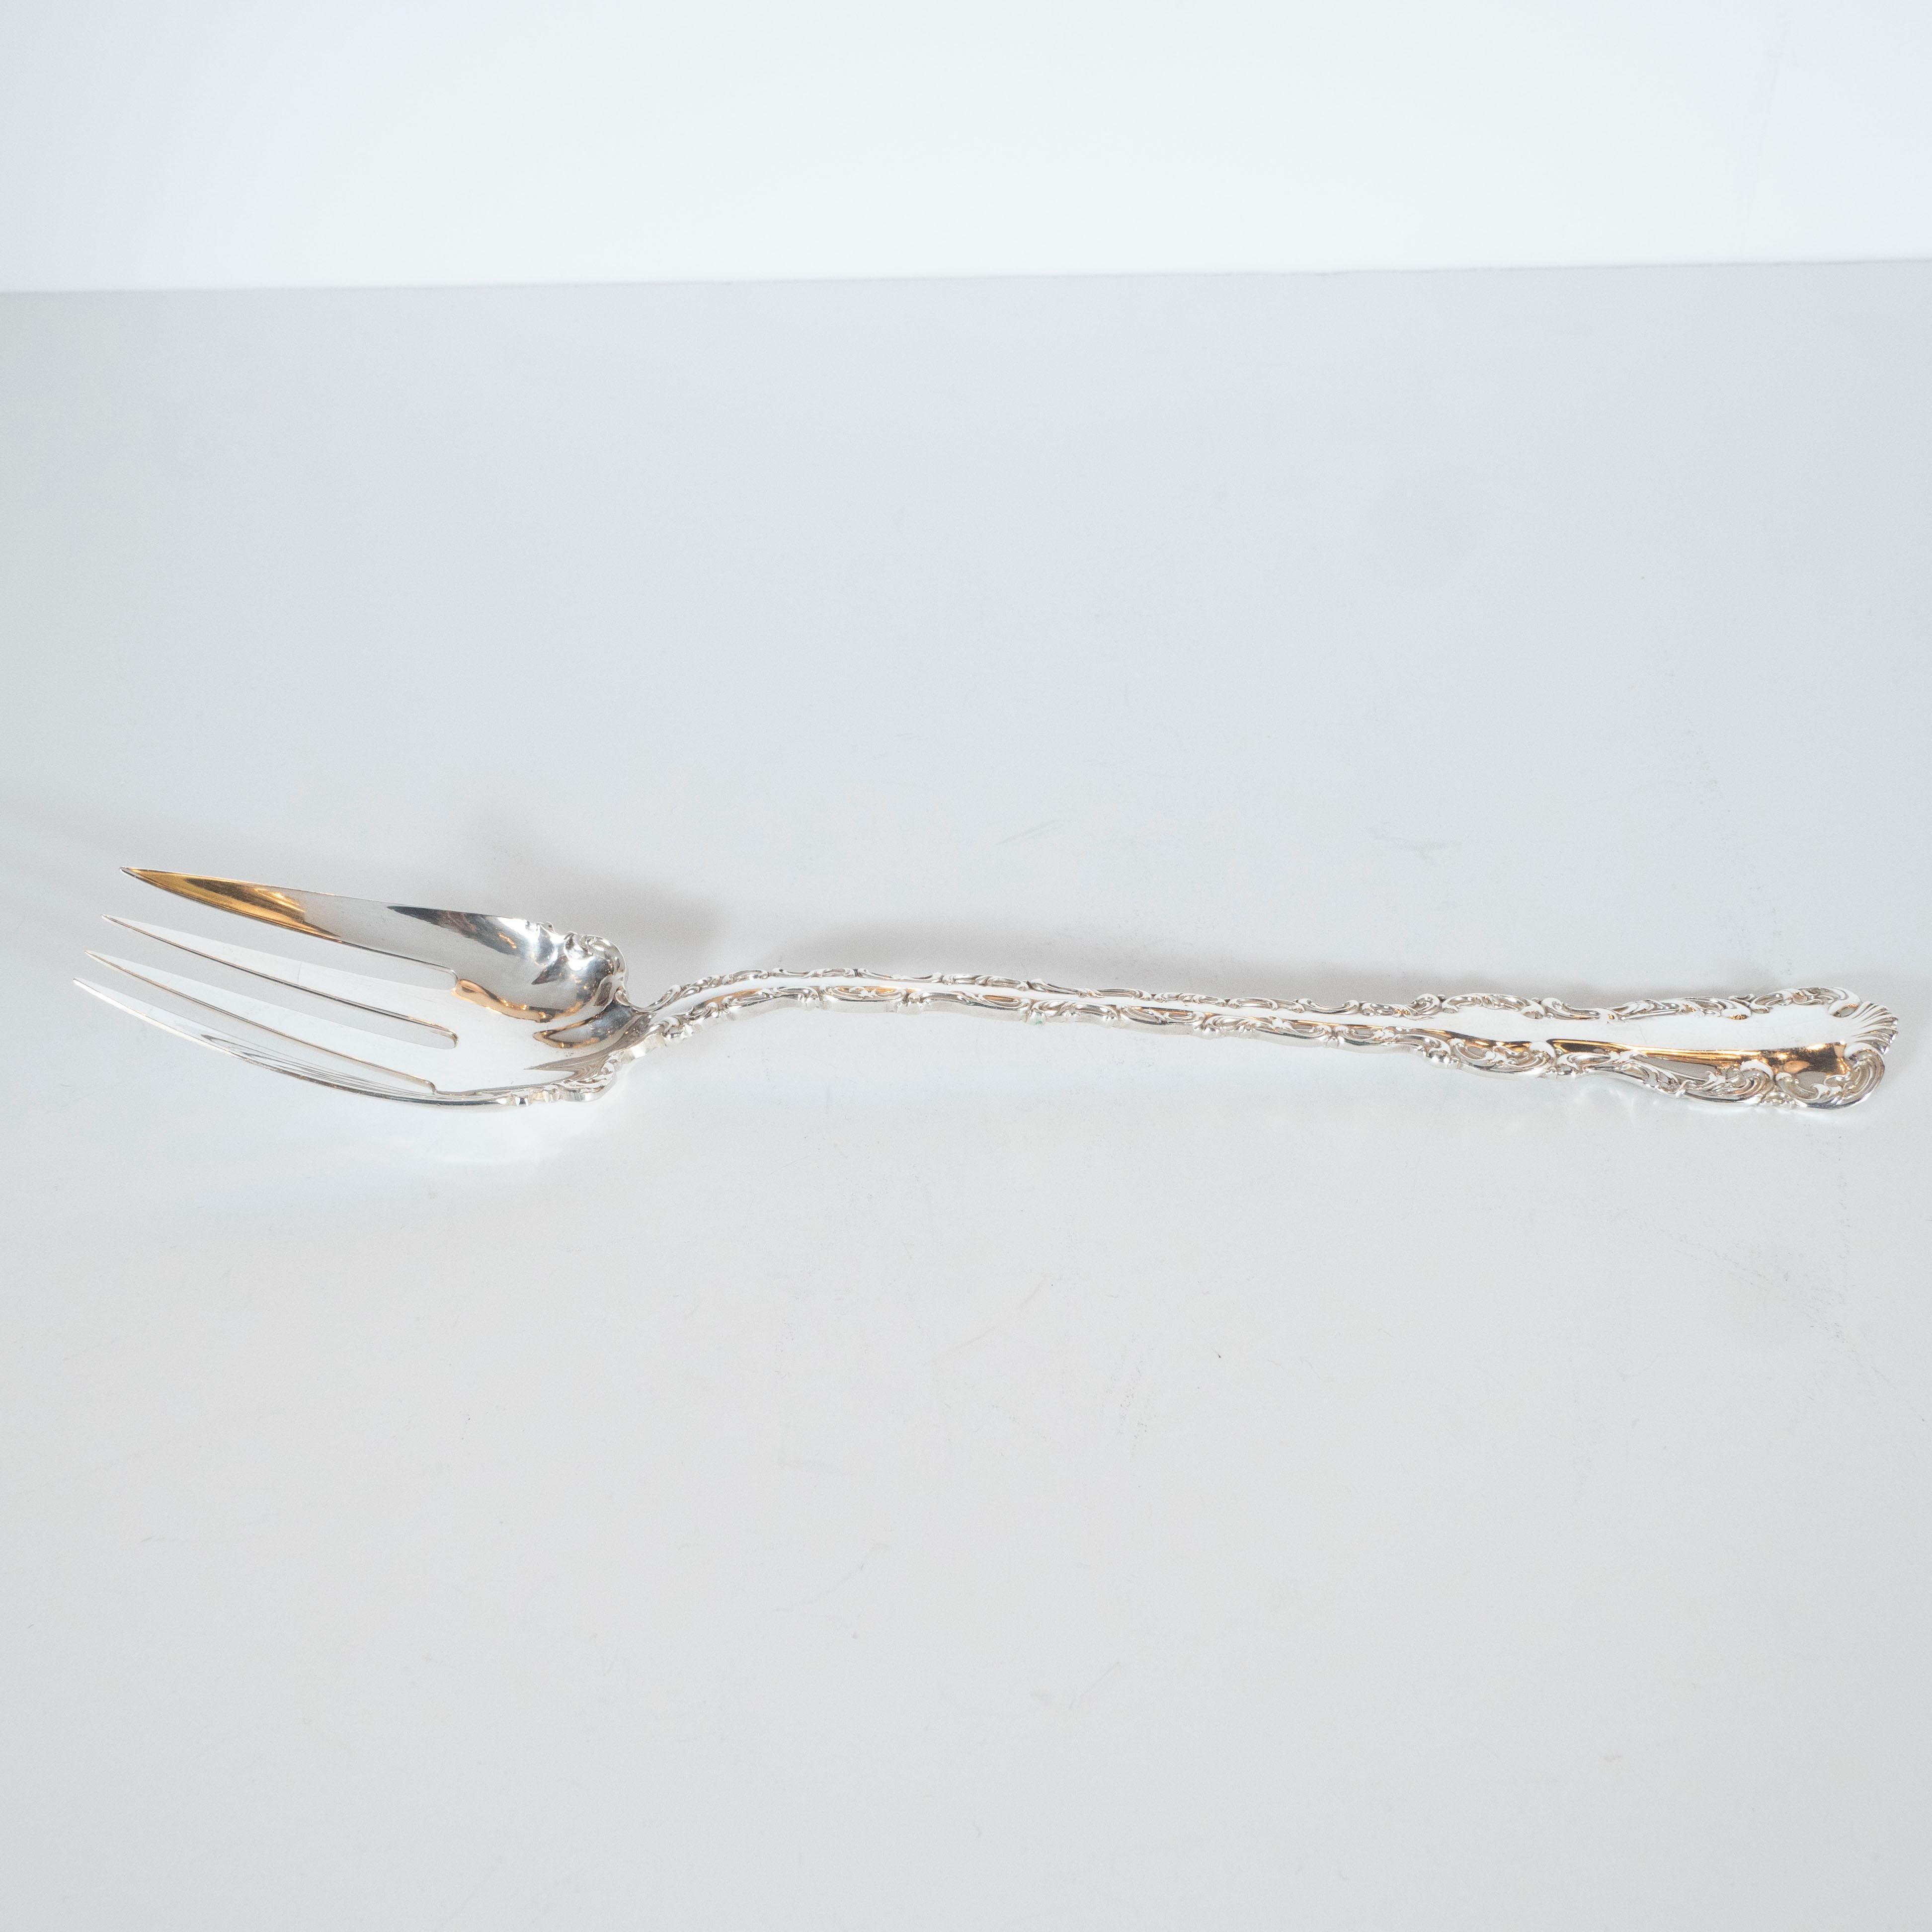 Mid-20th Century Two-Piece Neoclassical Sterling Silver Serving Set with Foliate Detailing